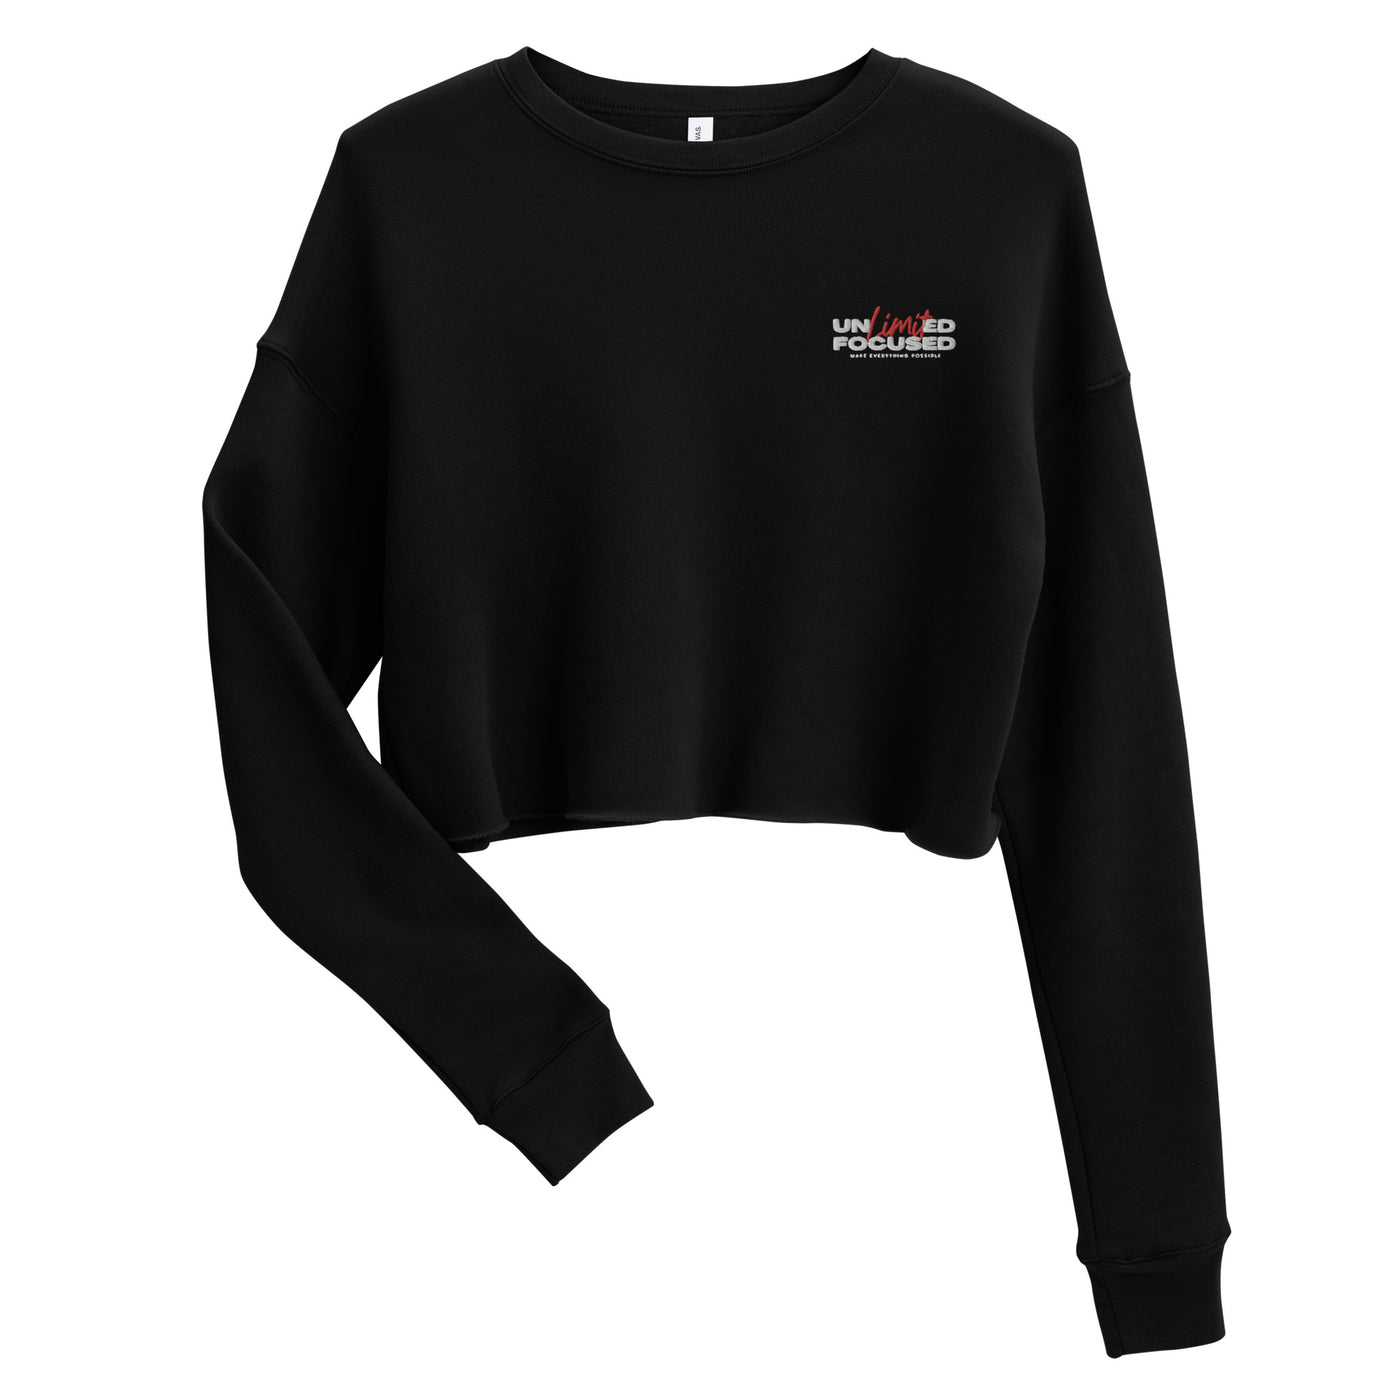 Women's Embroidered Black Cropped Sweatshirt - Unlimited Focused